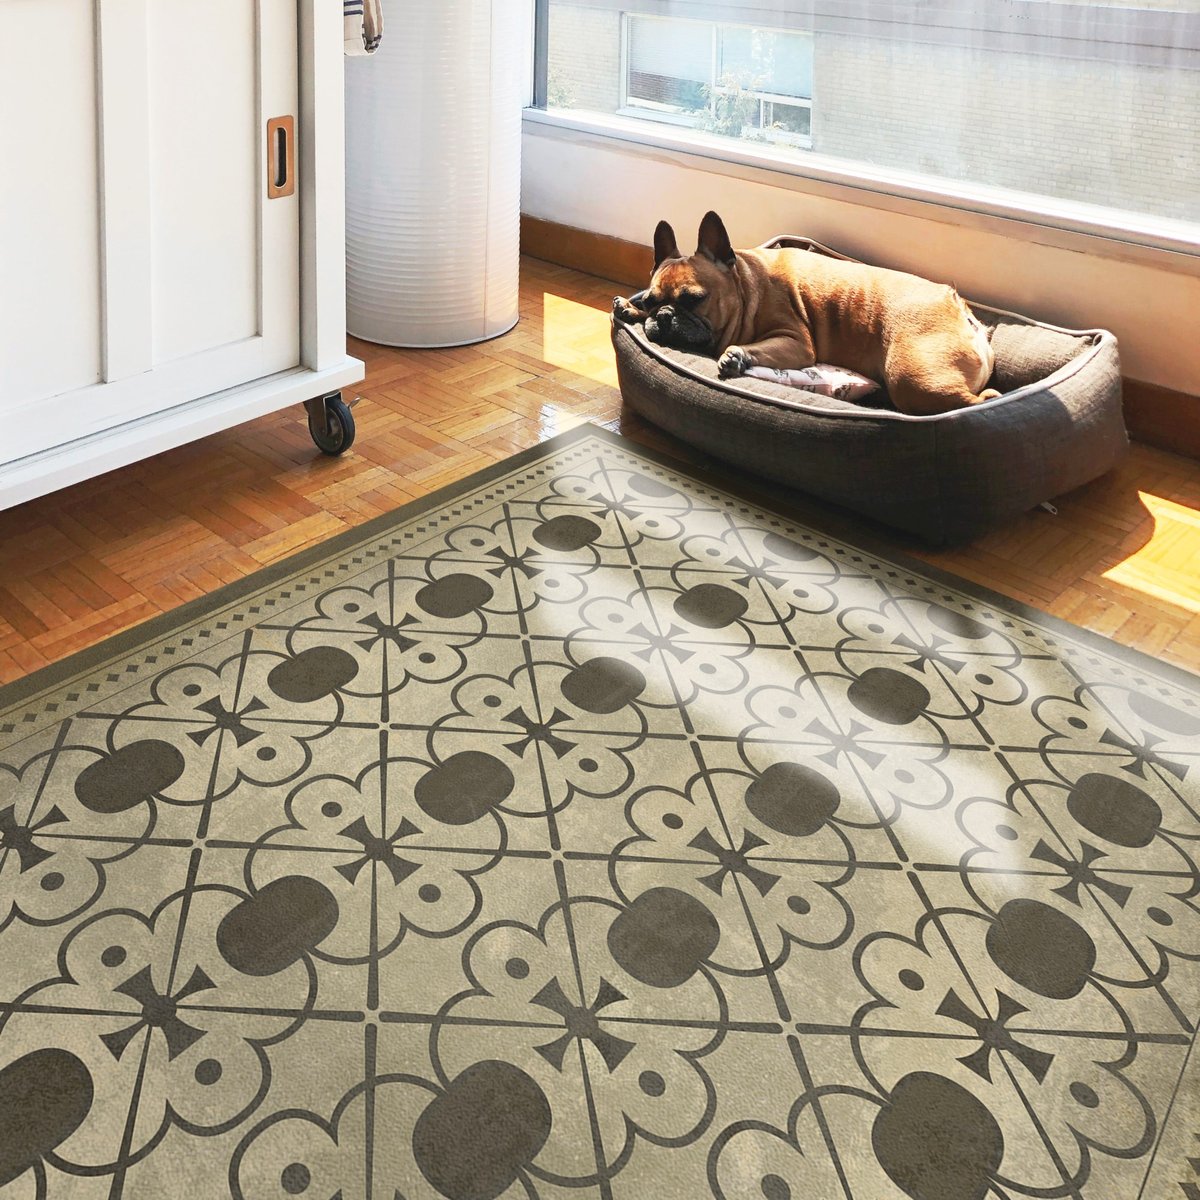 Her And Company Classic Vintage Vinyl Pattern 05 Rugs Direct